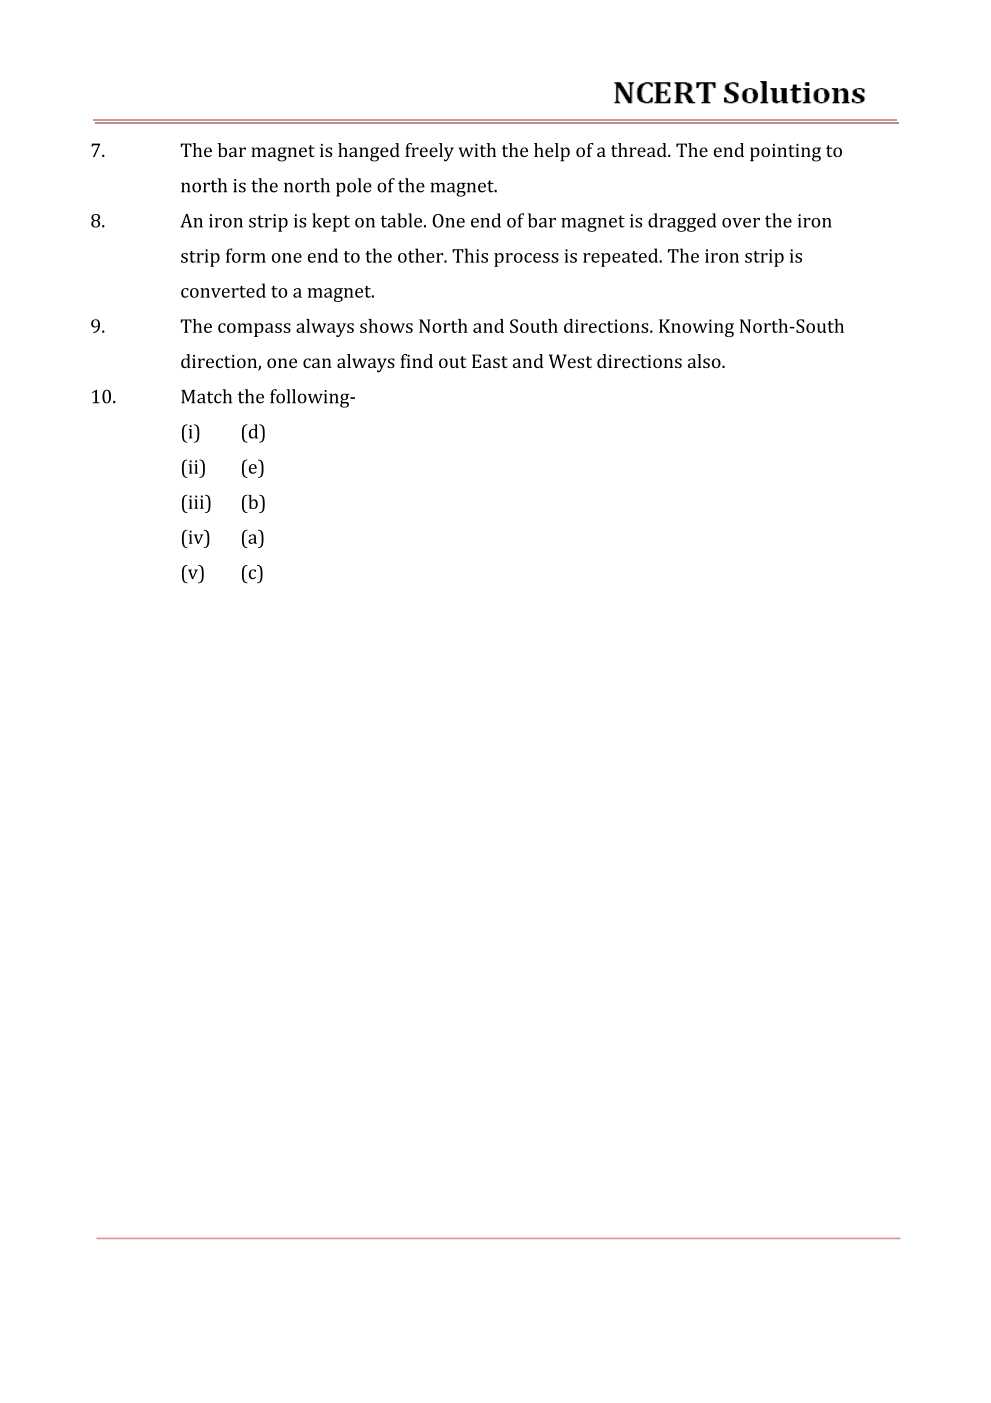 NCERT Solutions For Class 6 Science Chapter 13